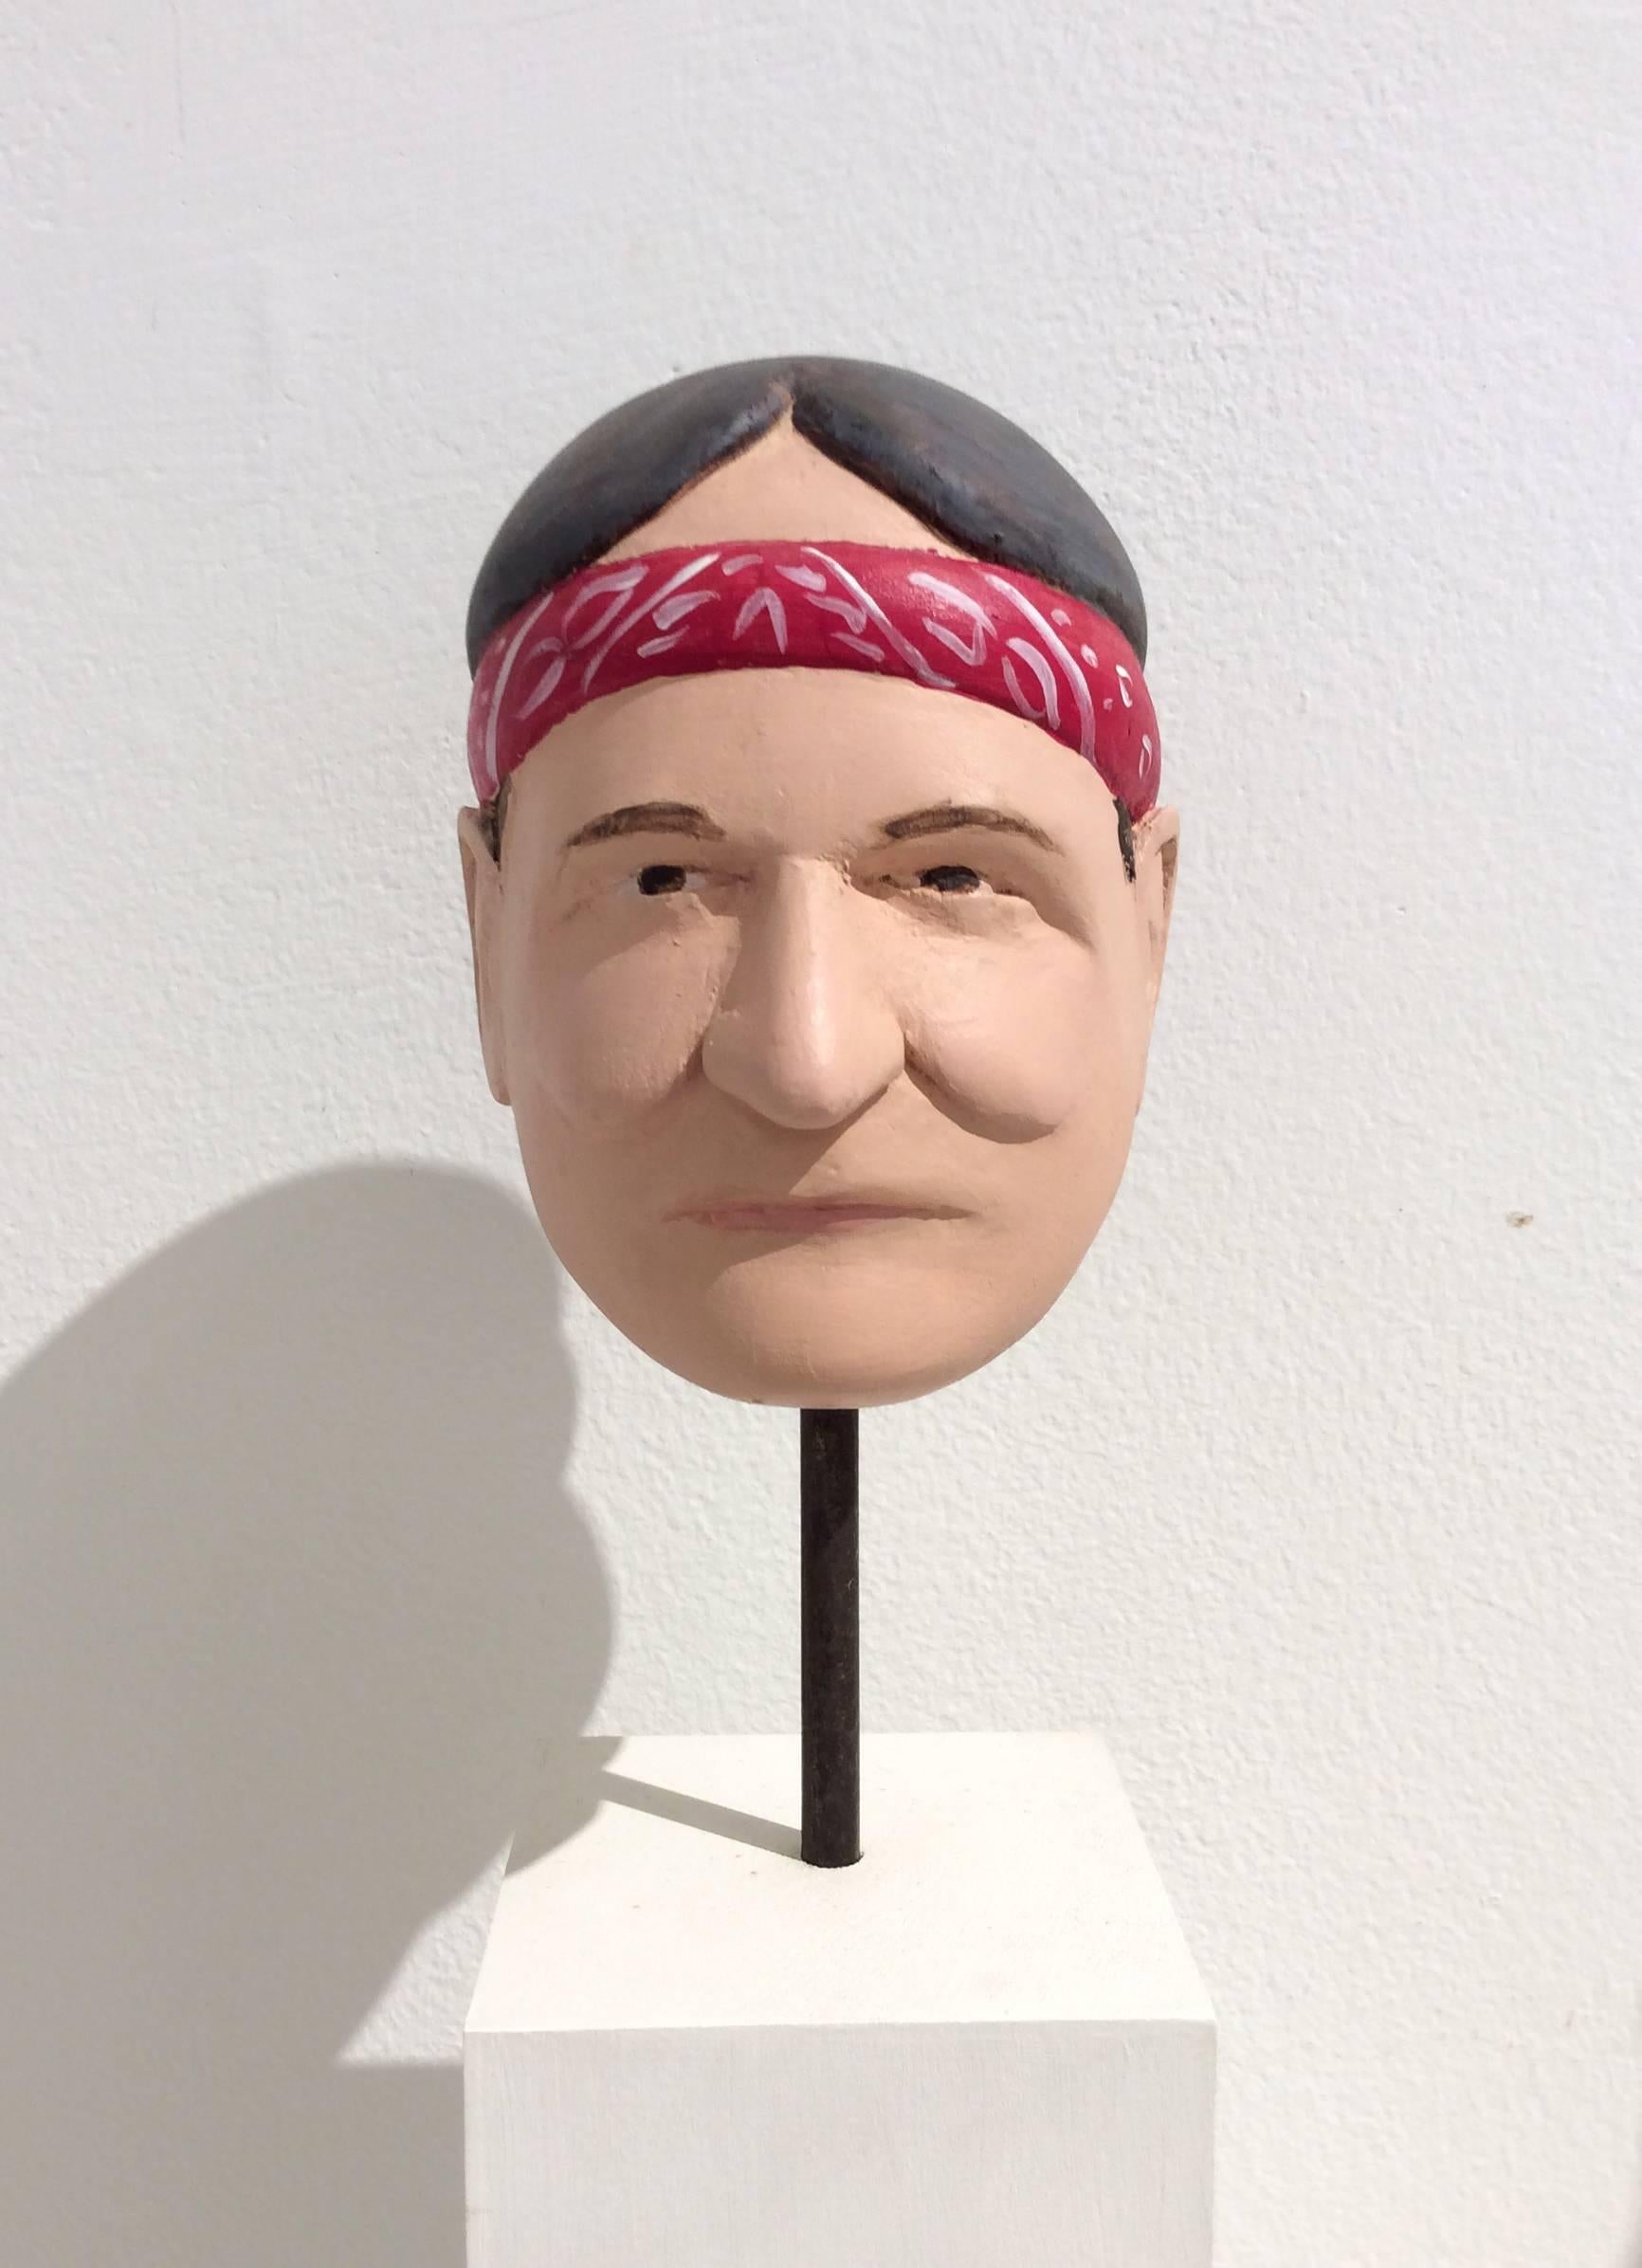 John Cross Figurative Sculpture - Willie Nelson (Carved Wooden bust of Willie Nelson on Pedestal w/ Red Bandanna)